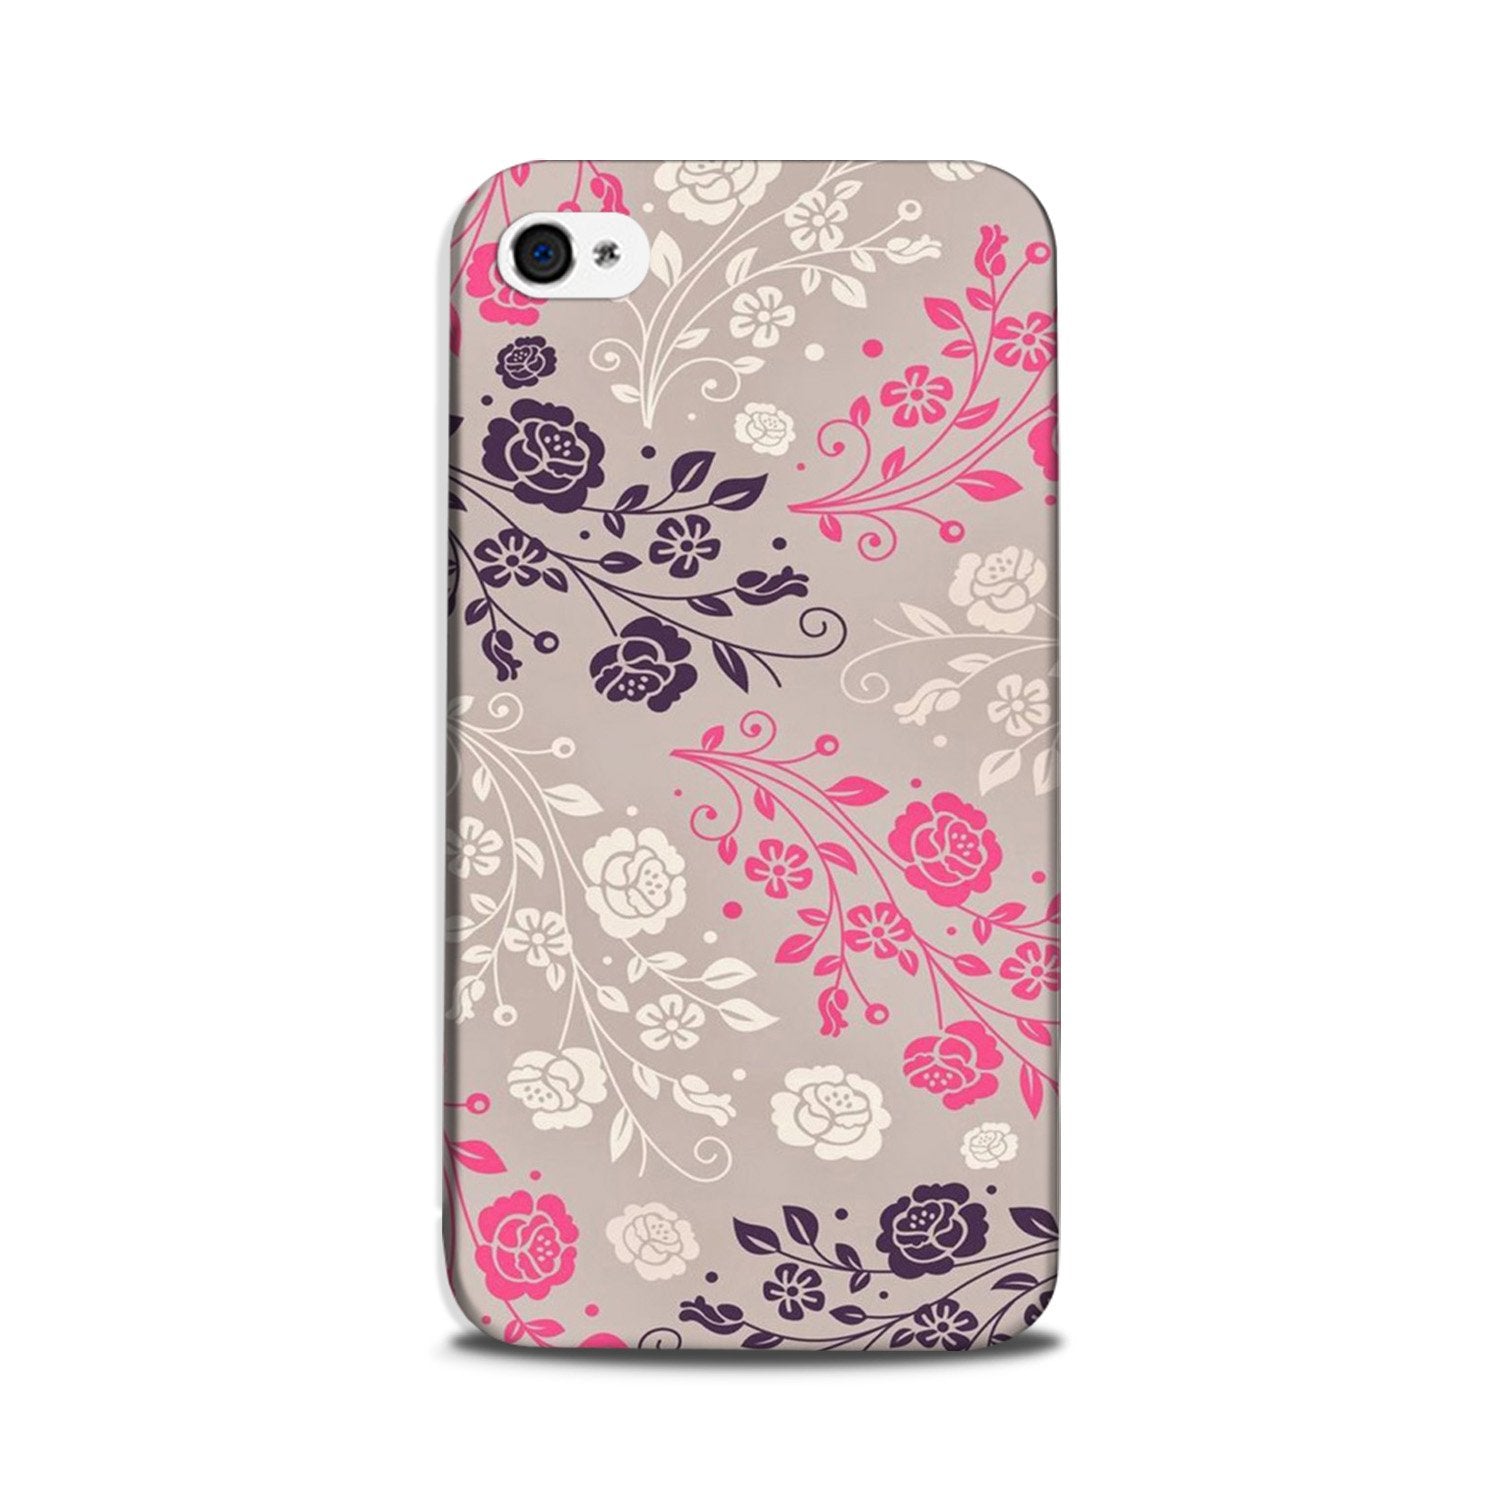 Pattern2 Case for iPhone 5/ 5s